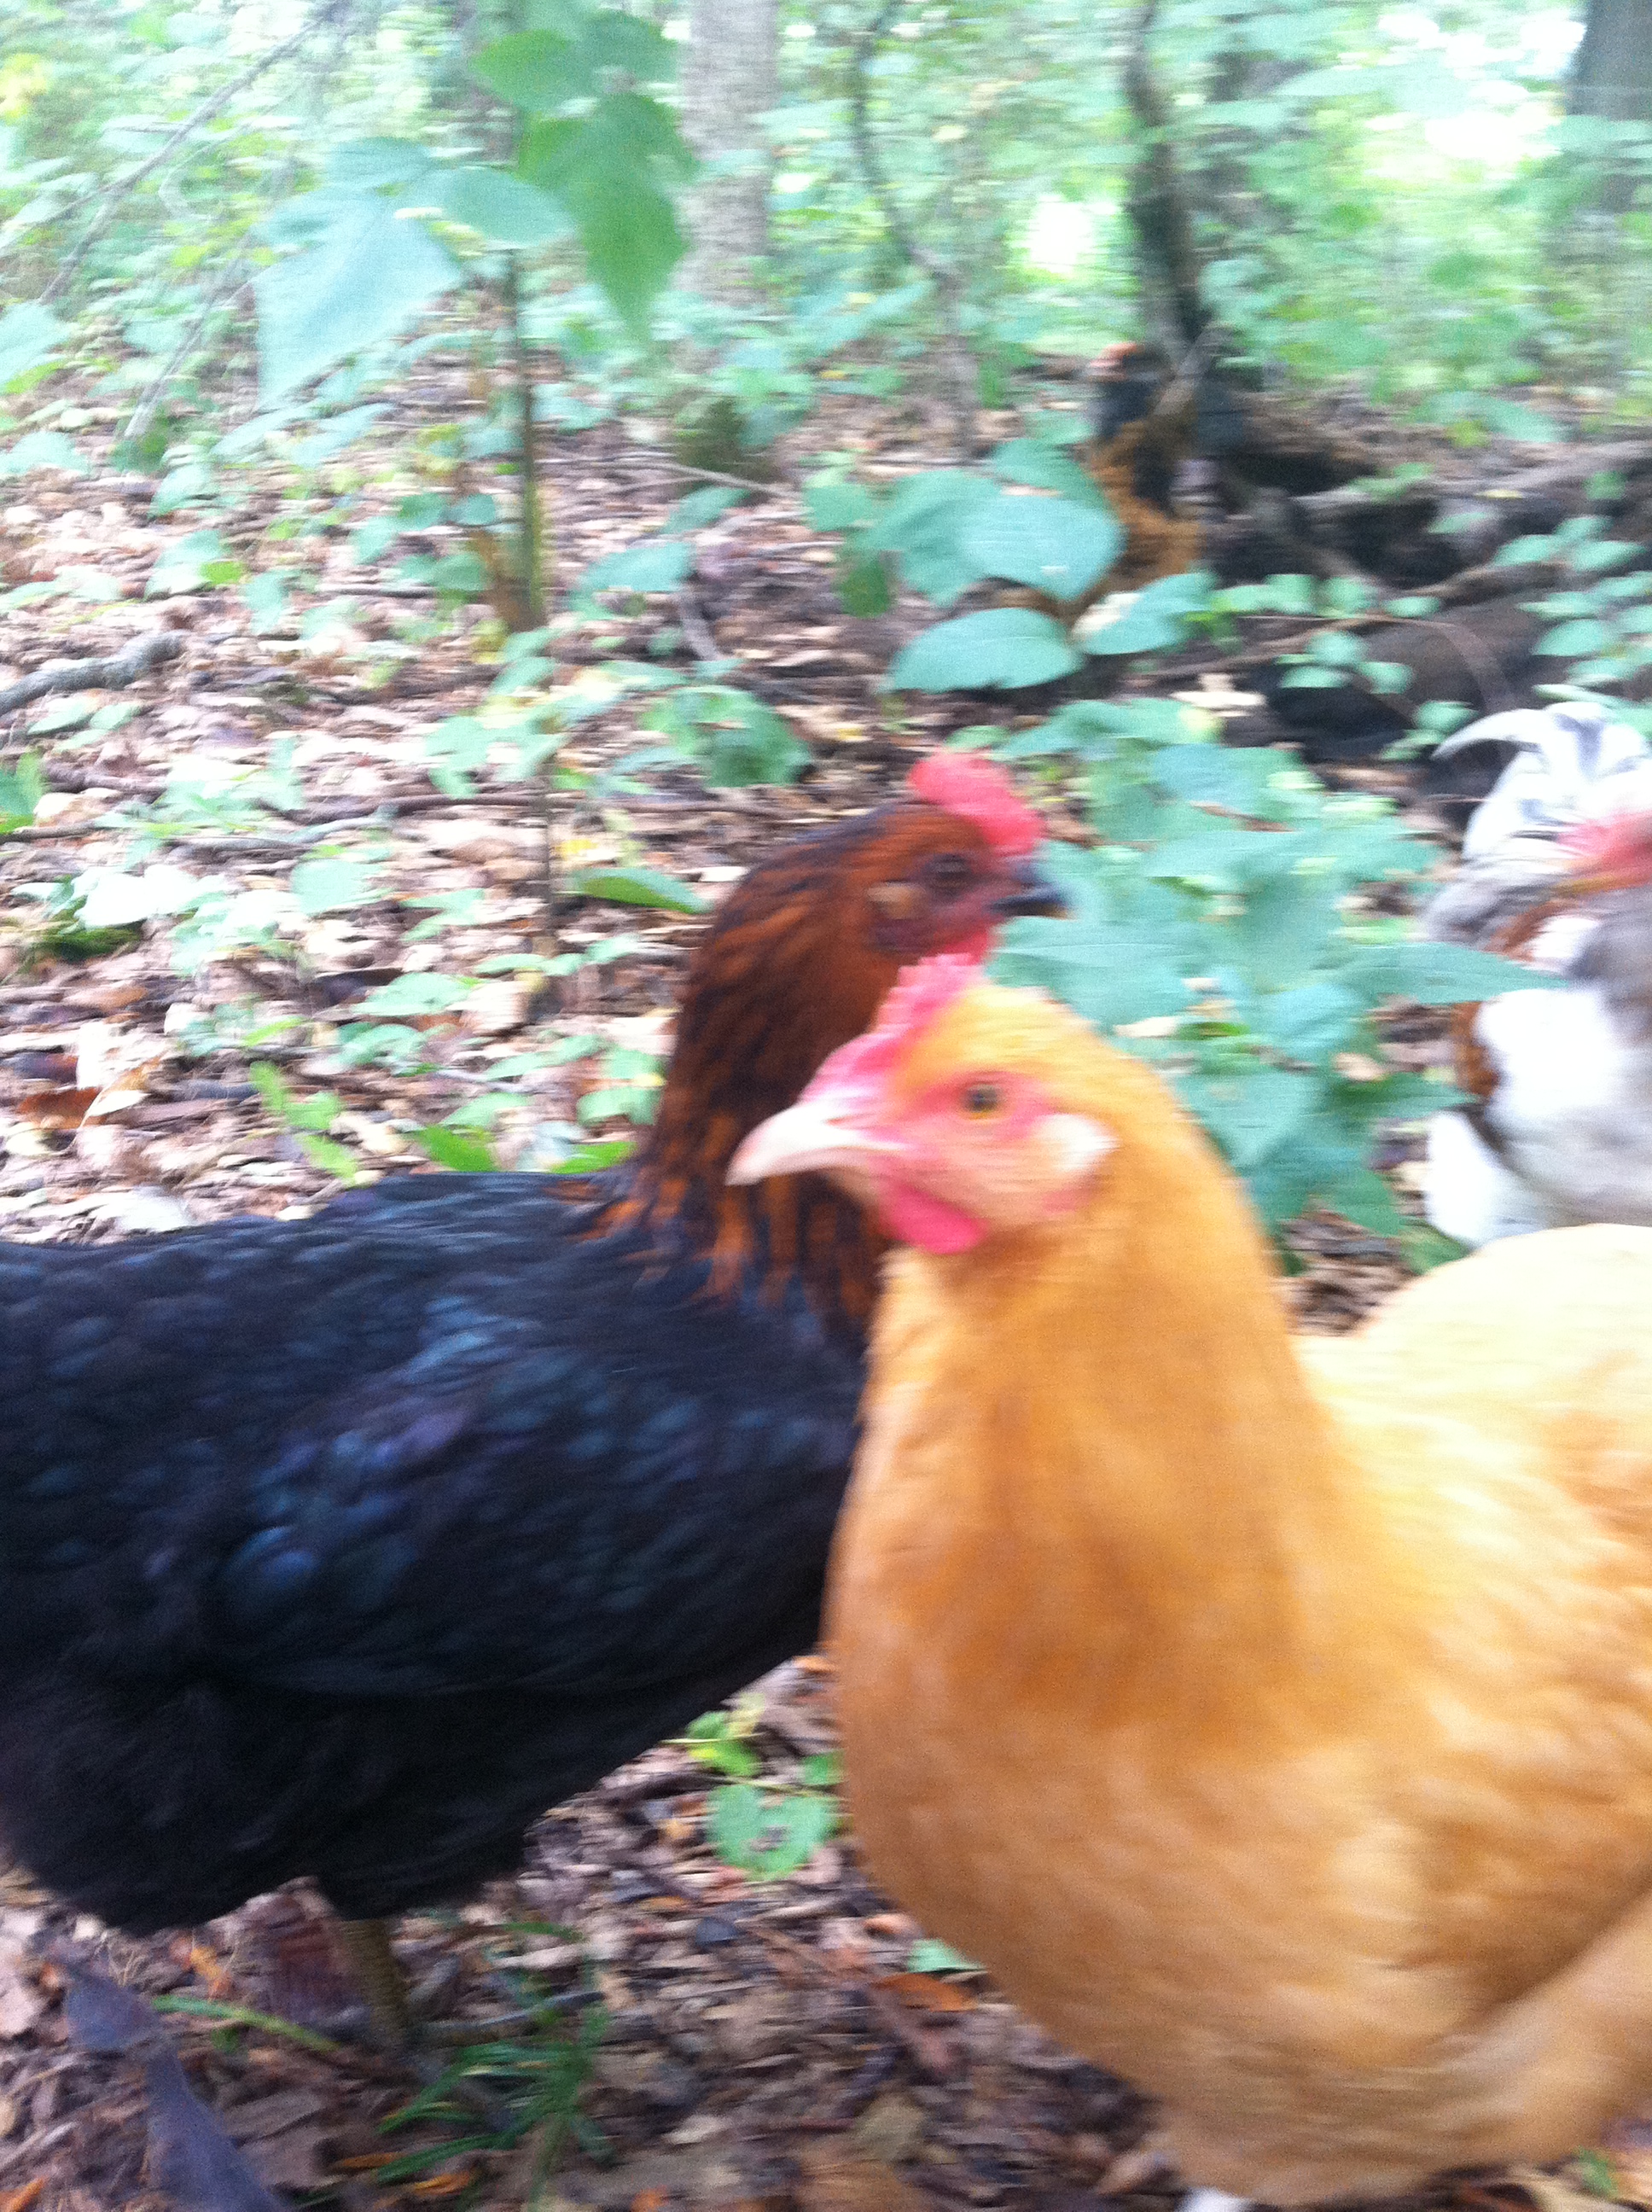 Sweet girls! Black Sex Link and Buff Orpington. Age 6.5 months.